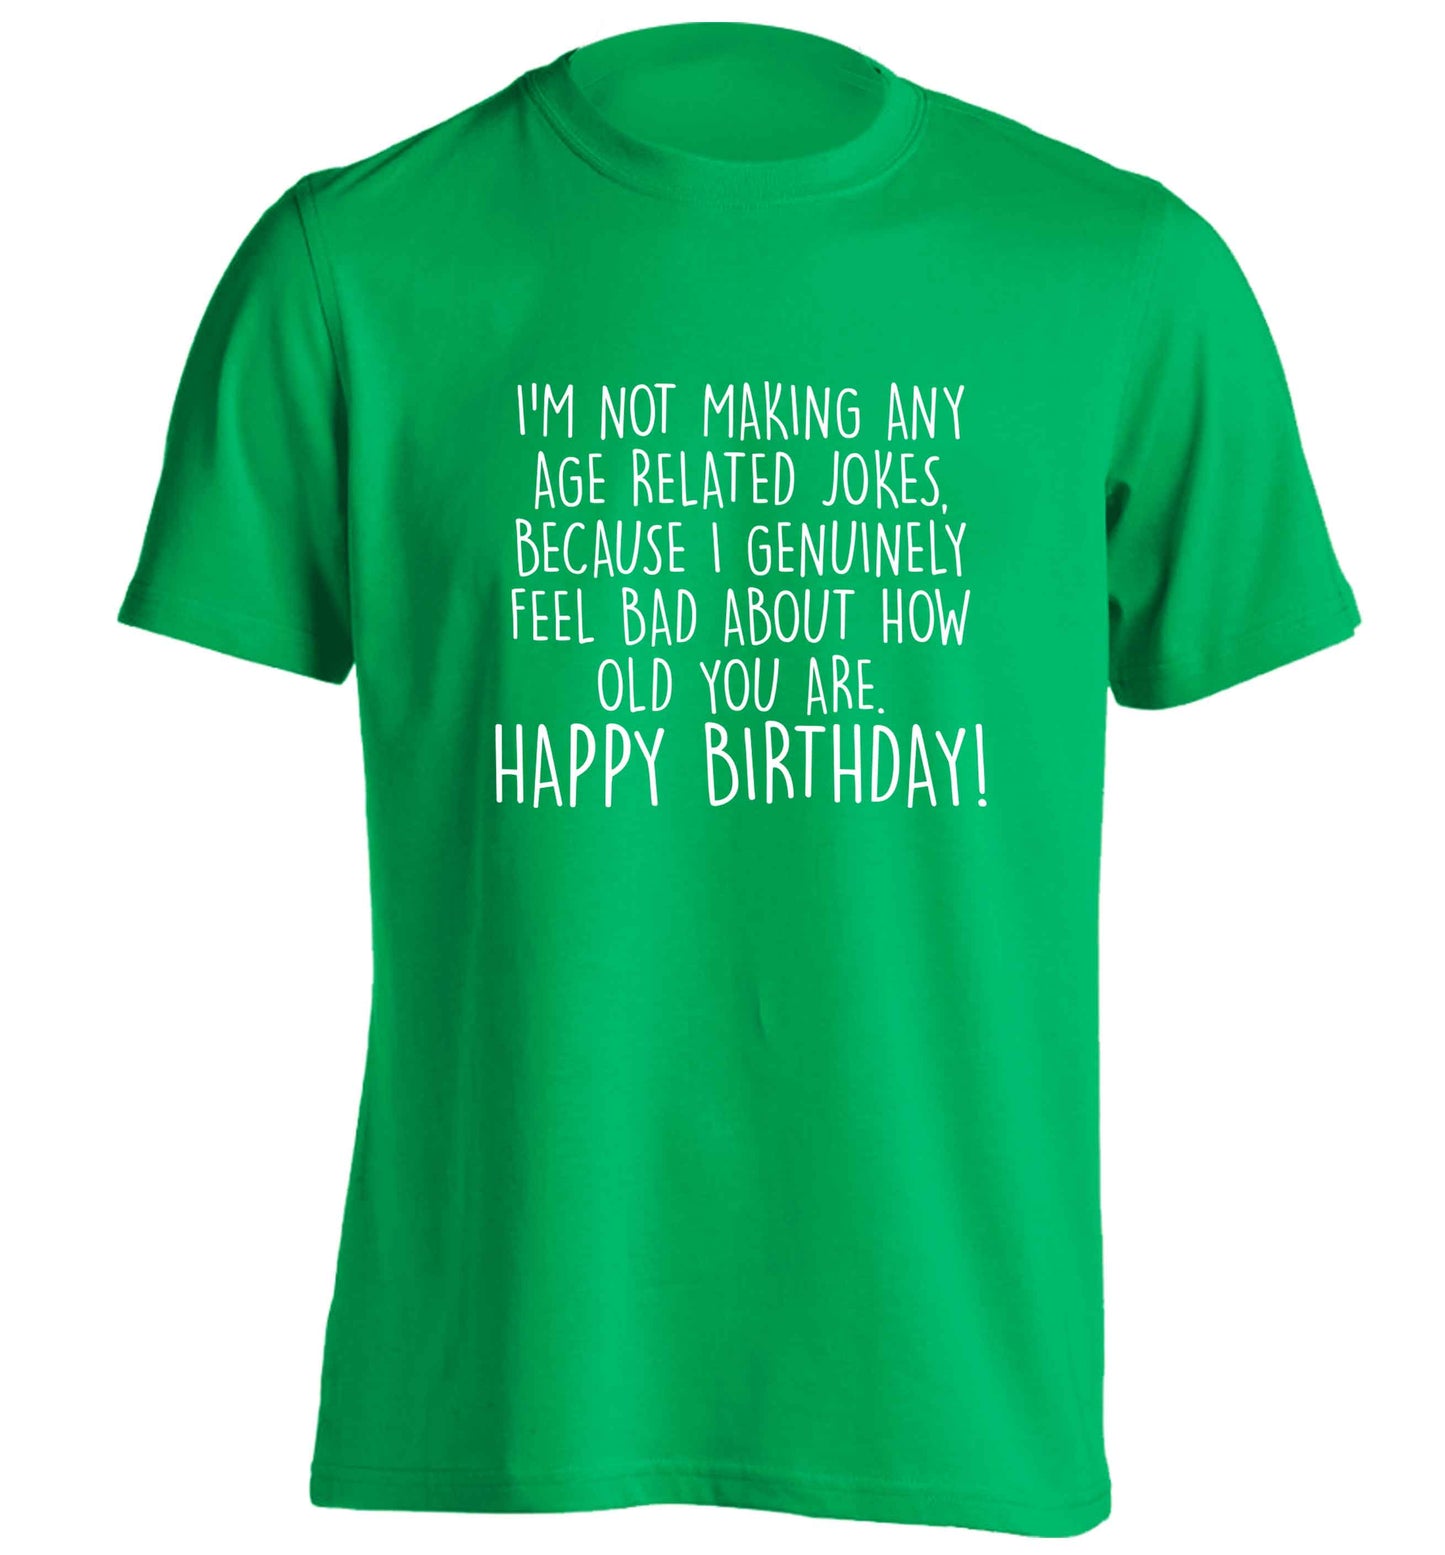 I'm not making any age related jokes because I genuinely feel bad for how old you are adults unisex green Tshirt 2XL